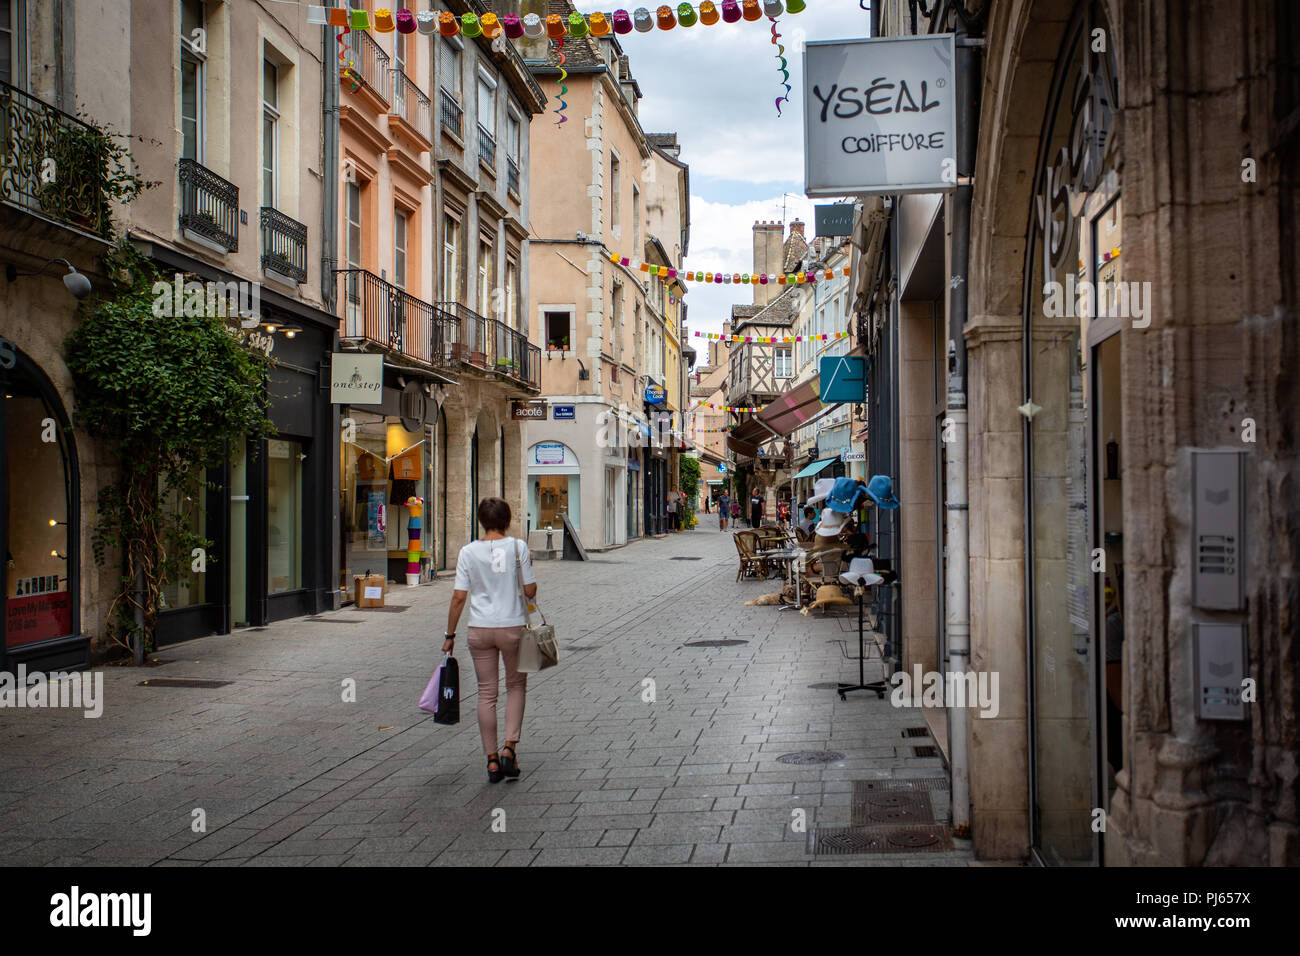 Pedestrianised shopping street in Chalon sur Saone, Burgundy, France on 29 August 2018 Stock Photo